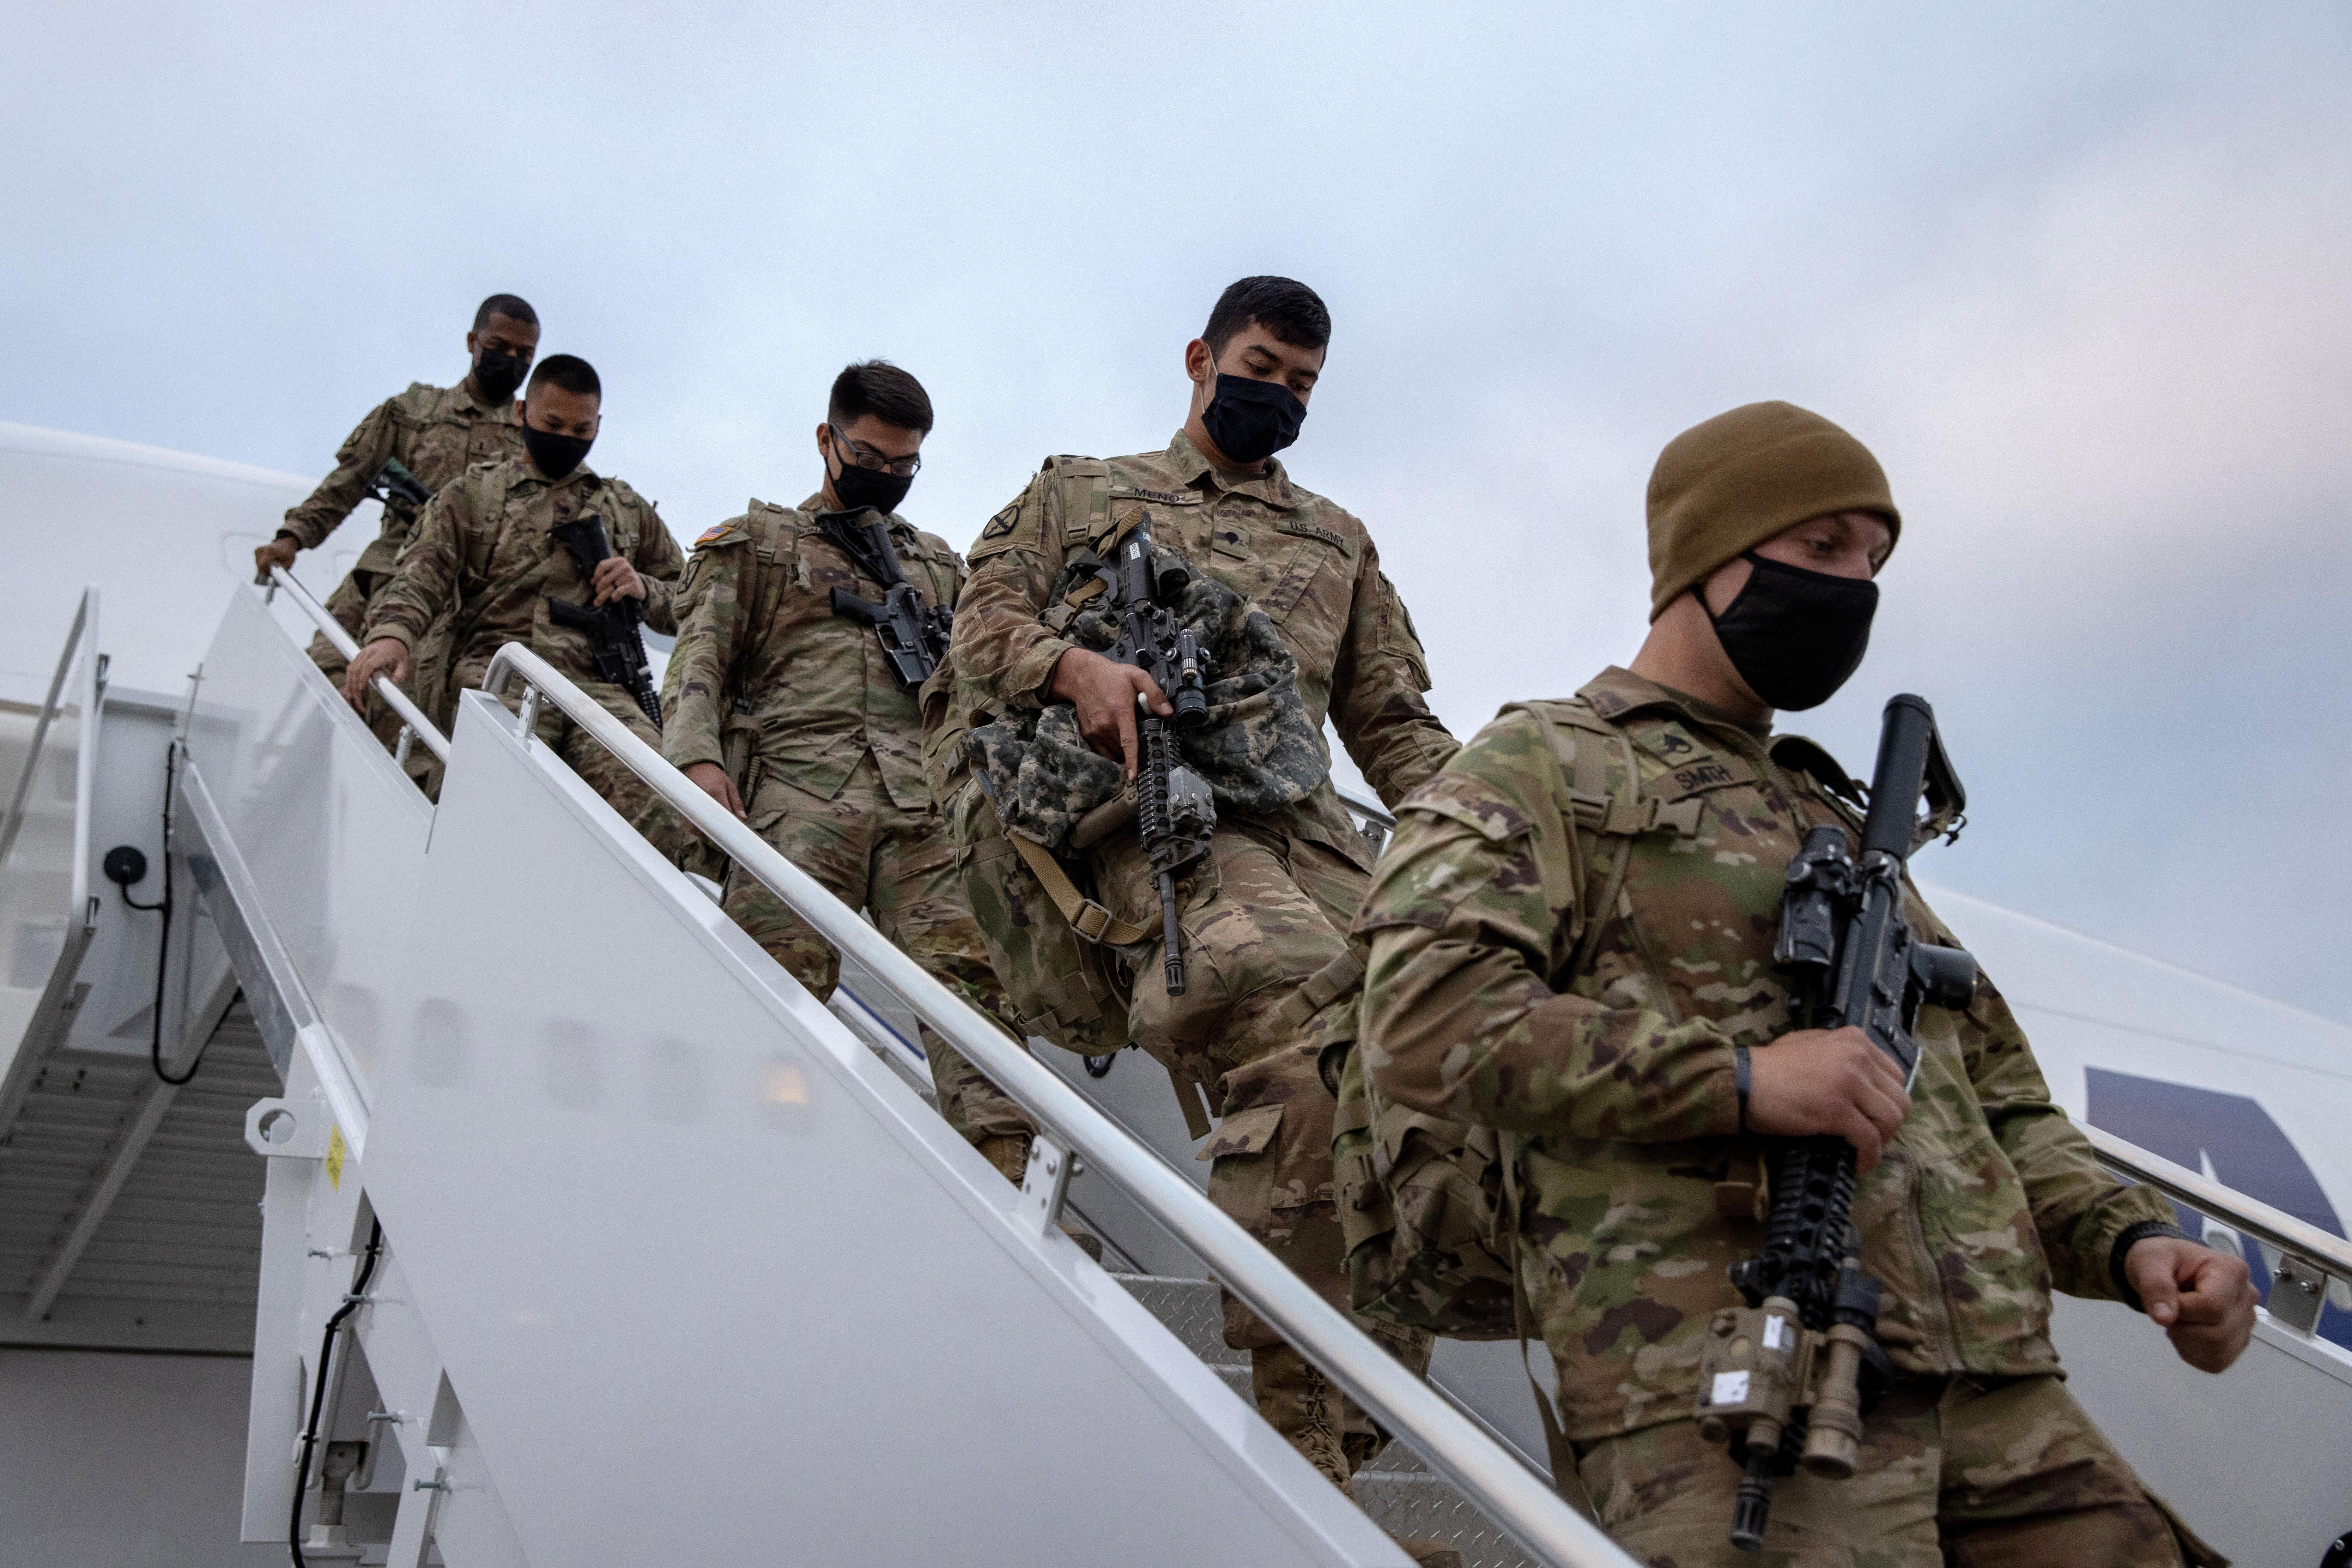 Uniformed troops walking down the stairway from a plane.